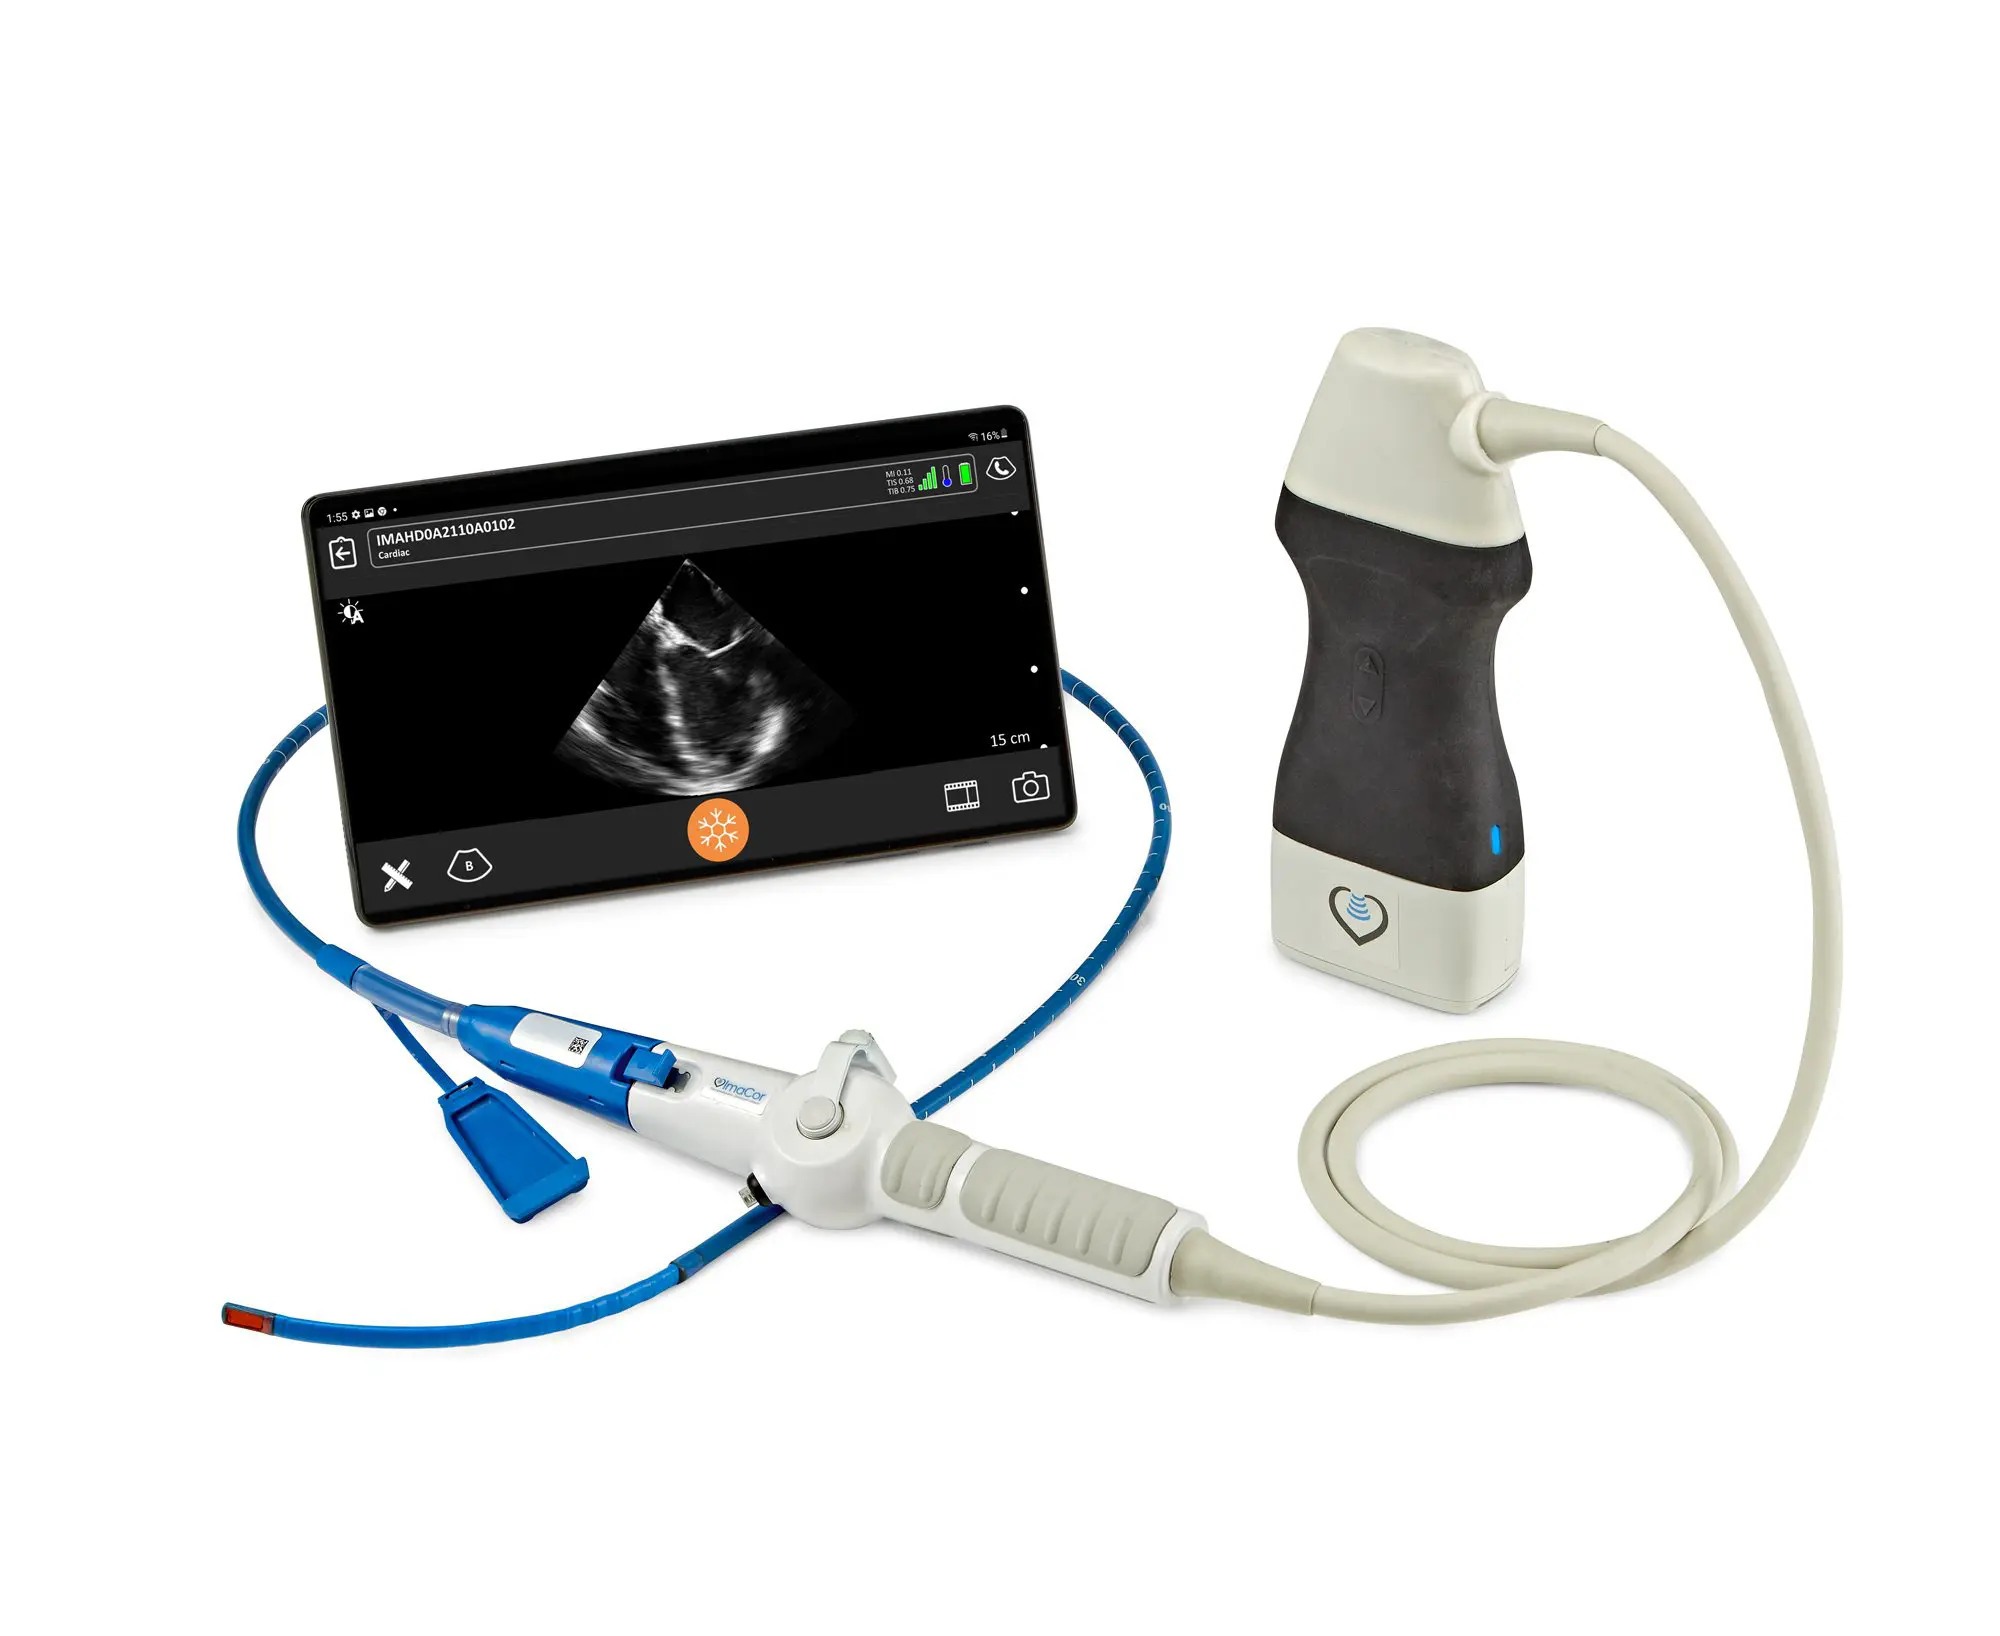 The Zura Handheld Hemodynamic Ultrasound system powered by Clarius provides an instant, clear window to directly visualize preload and contractility over time. (Credit: Clarius)